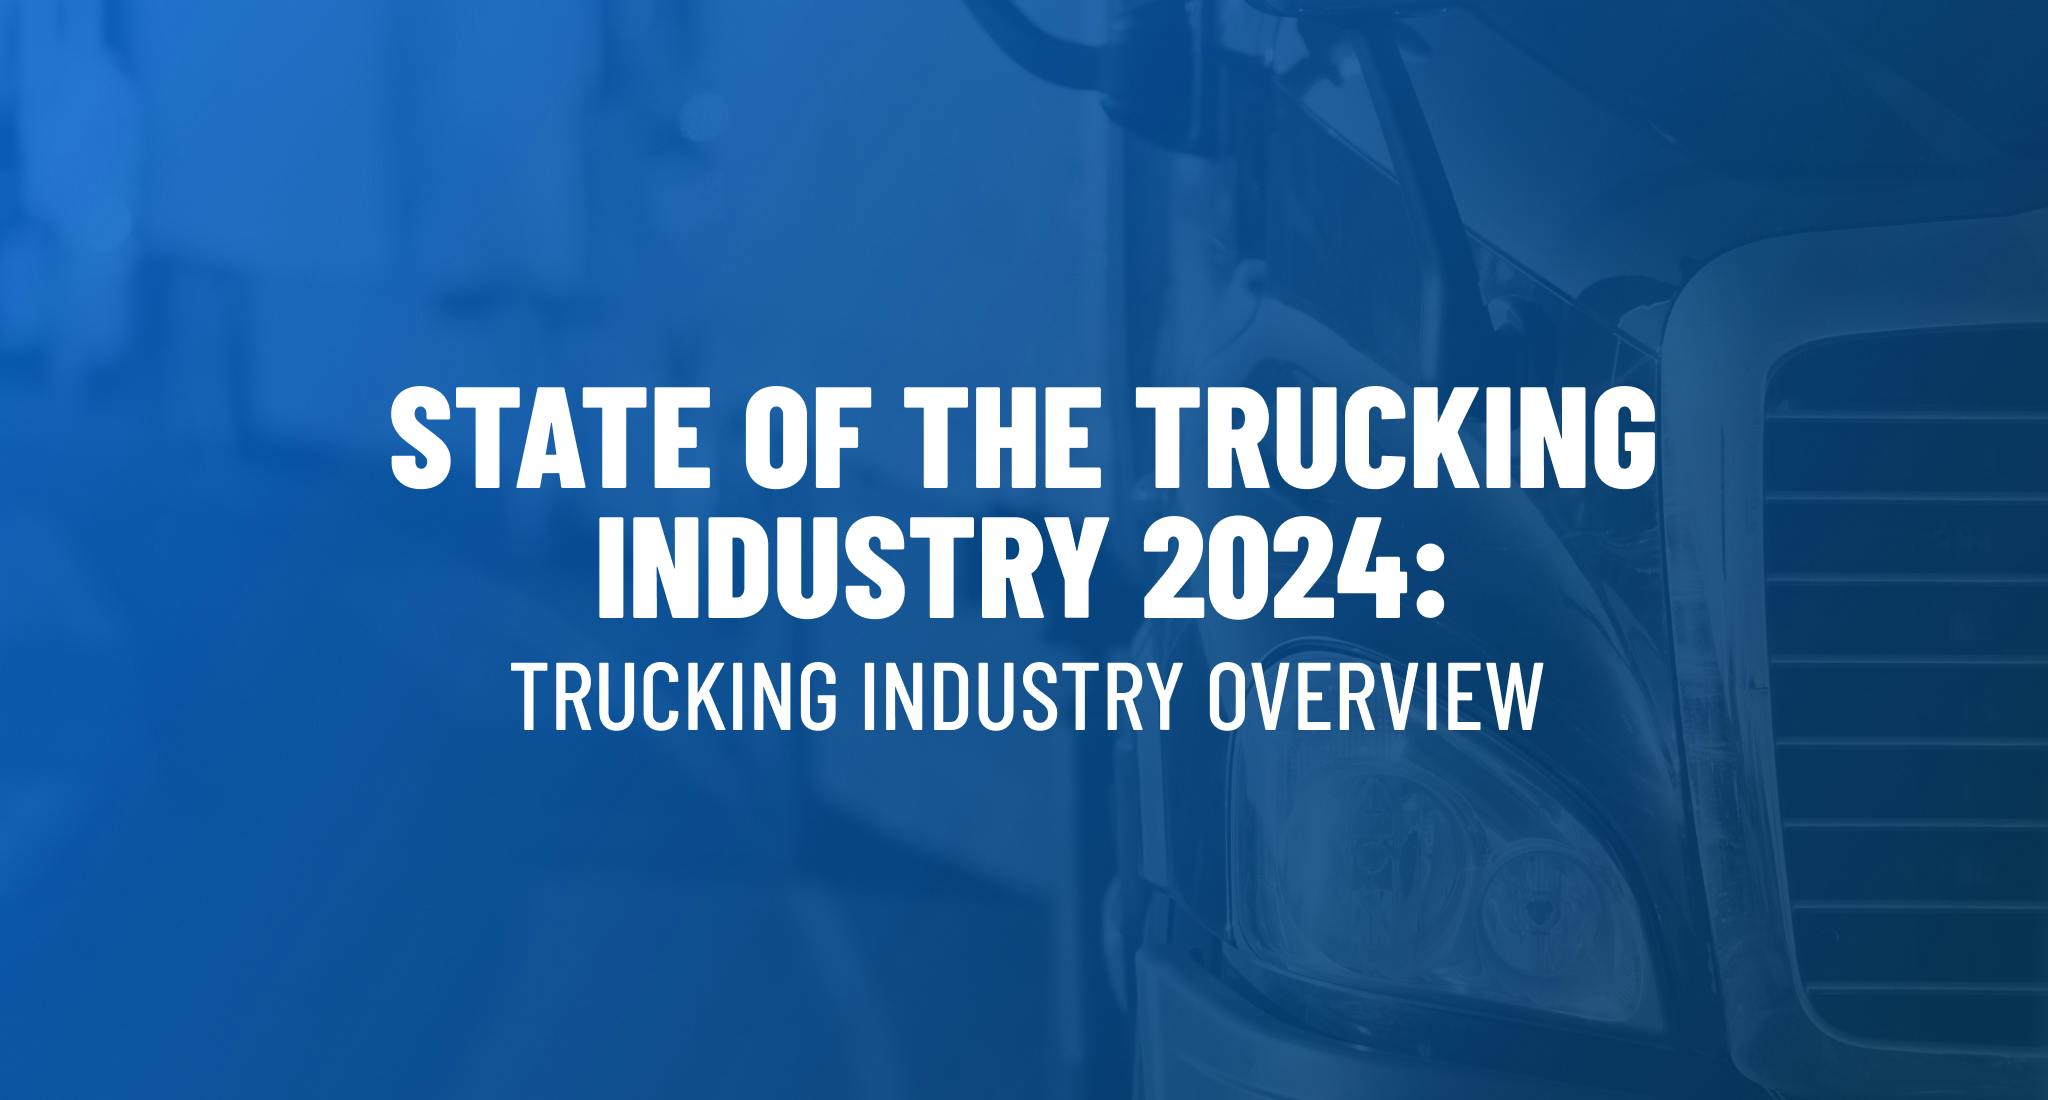 State of the trucking industry 2024. 